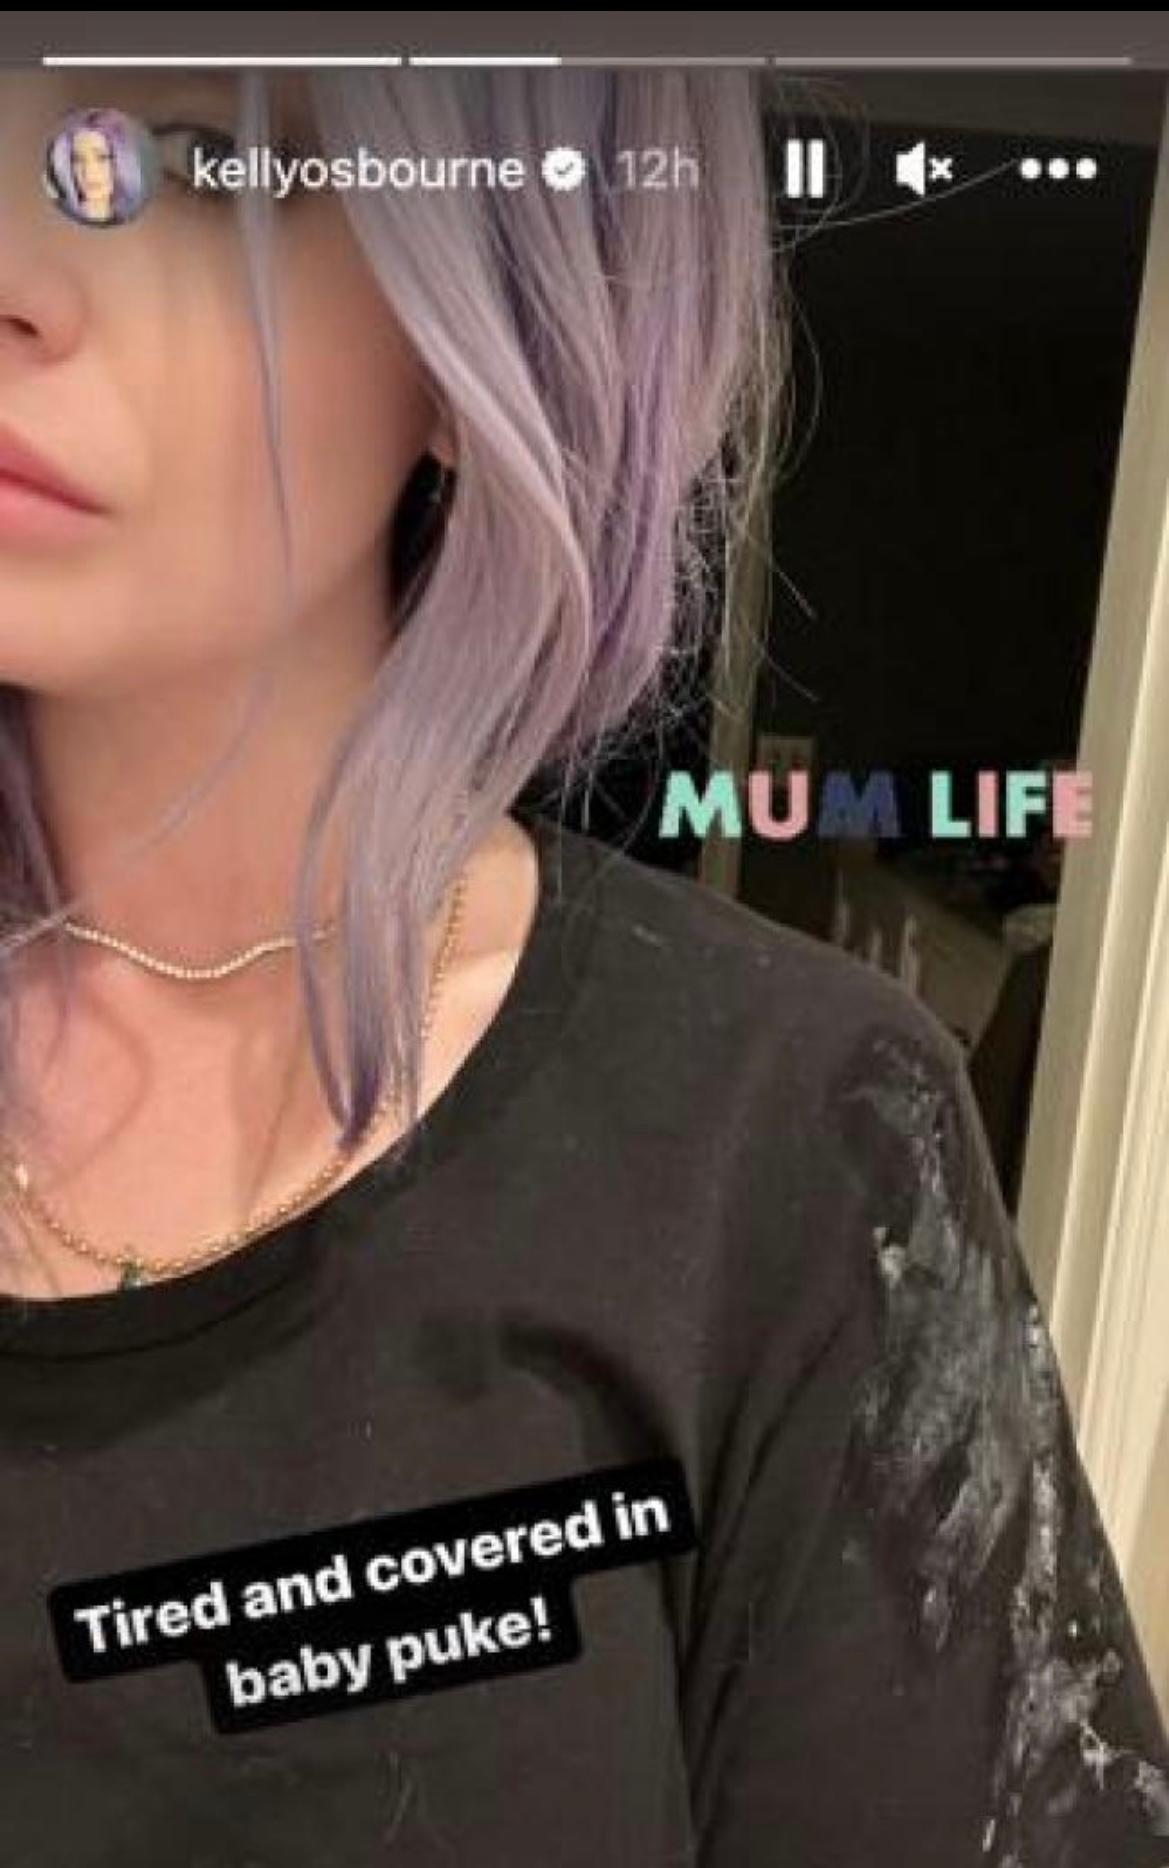 Kelly Osbourne gives glimpse at relatable mom life